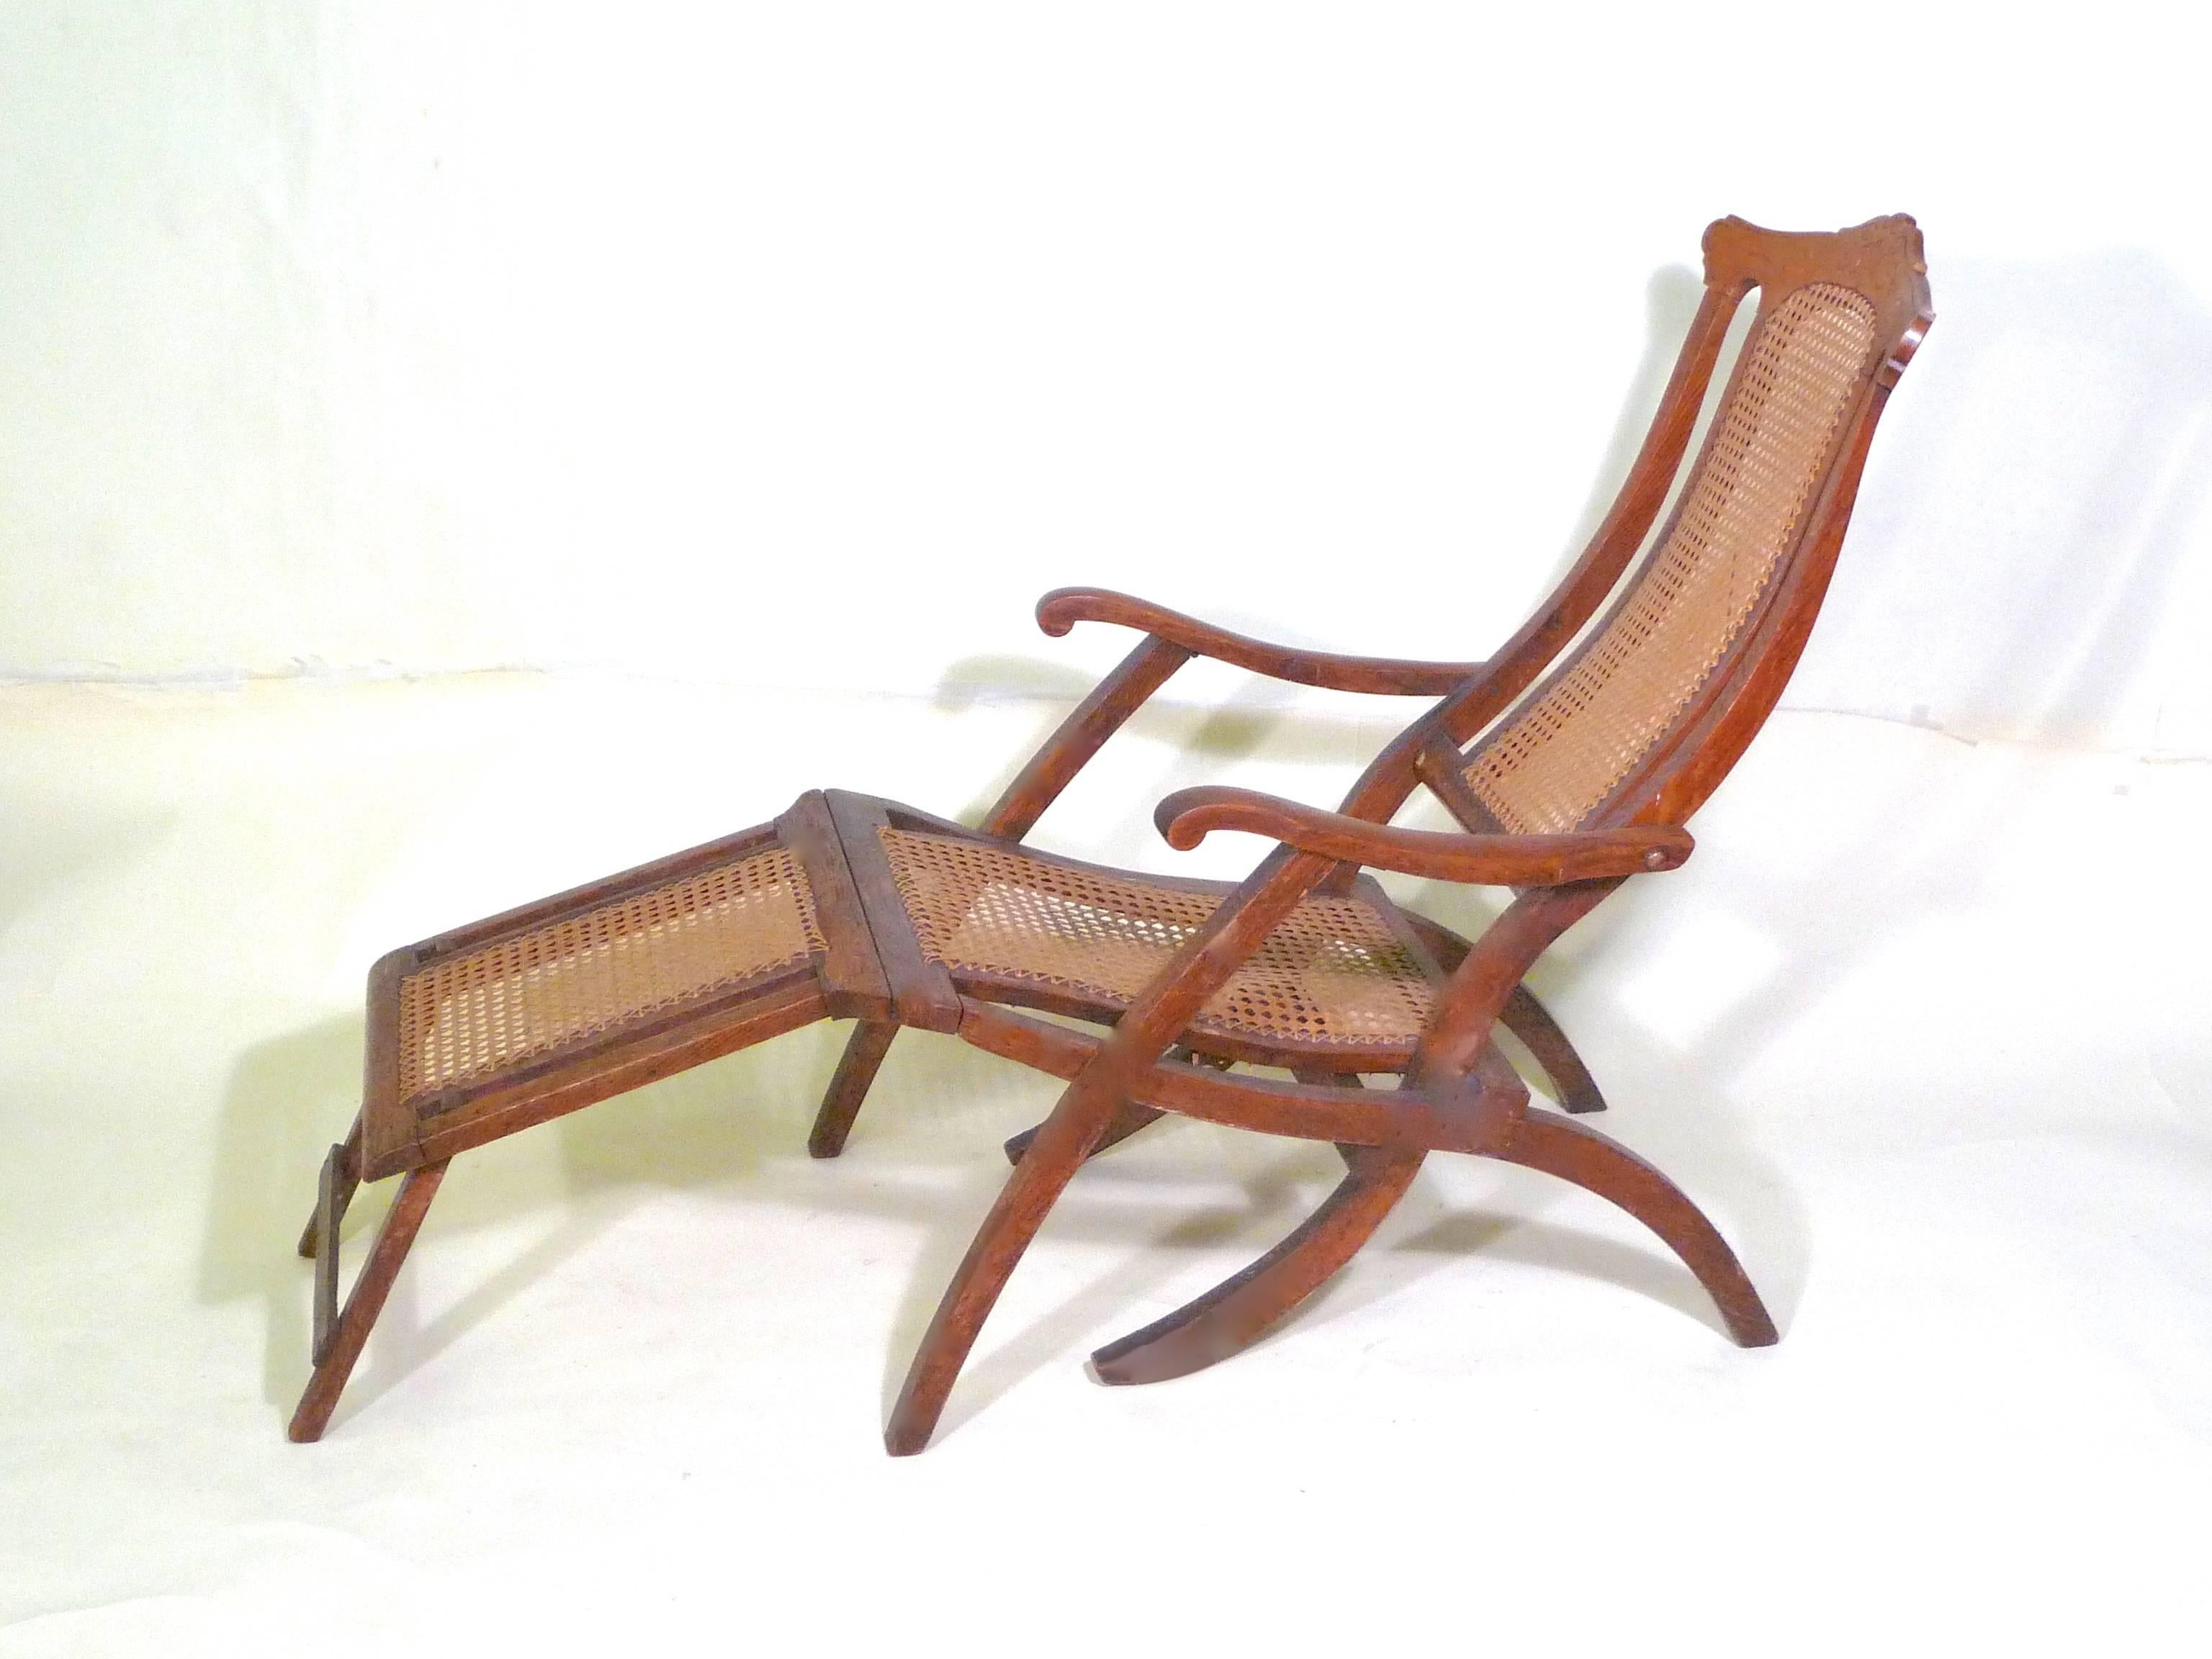 Late Victorian/Edwardian traveling on the great steamer ships of that era would have been enlivened by time spent on deck in one of these steamer chairs. Made of a hardwood, probably mahogany, and traditional caning, an articulated Victorian back,